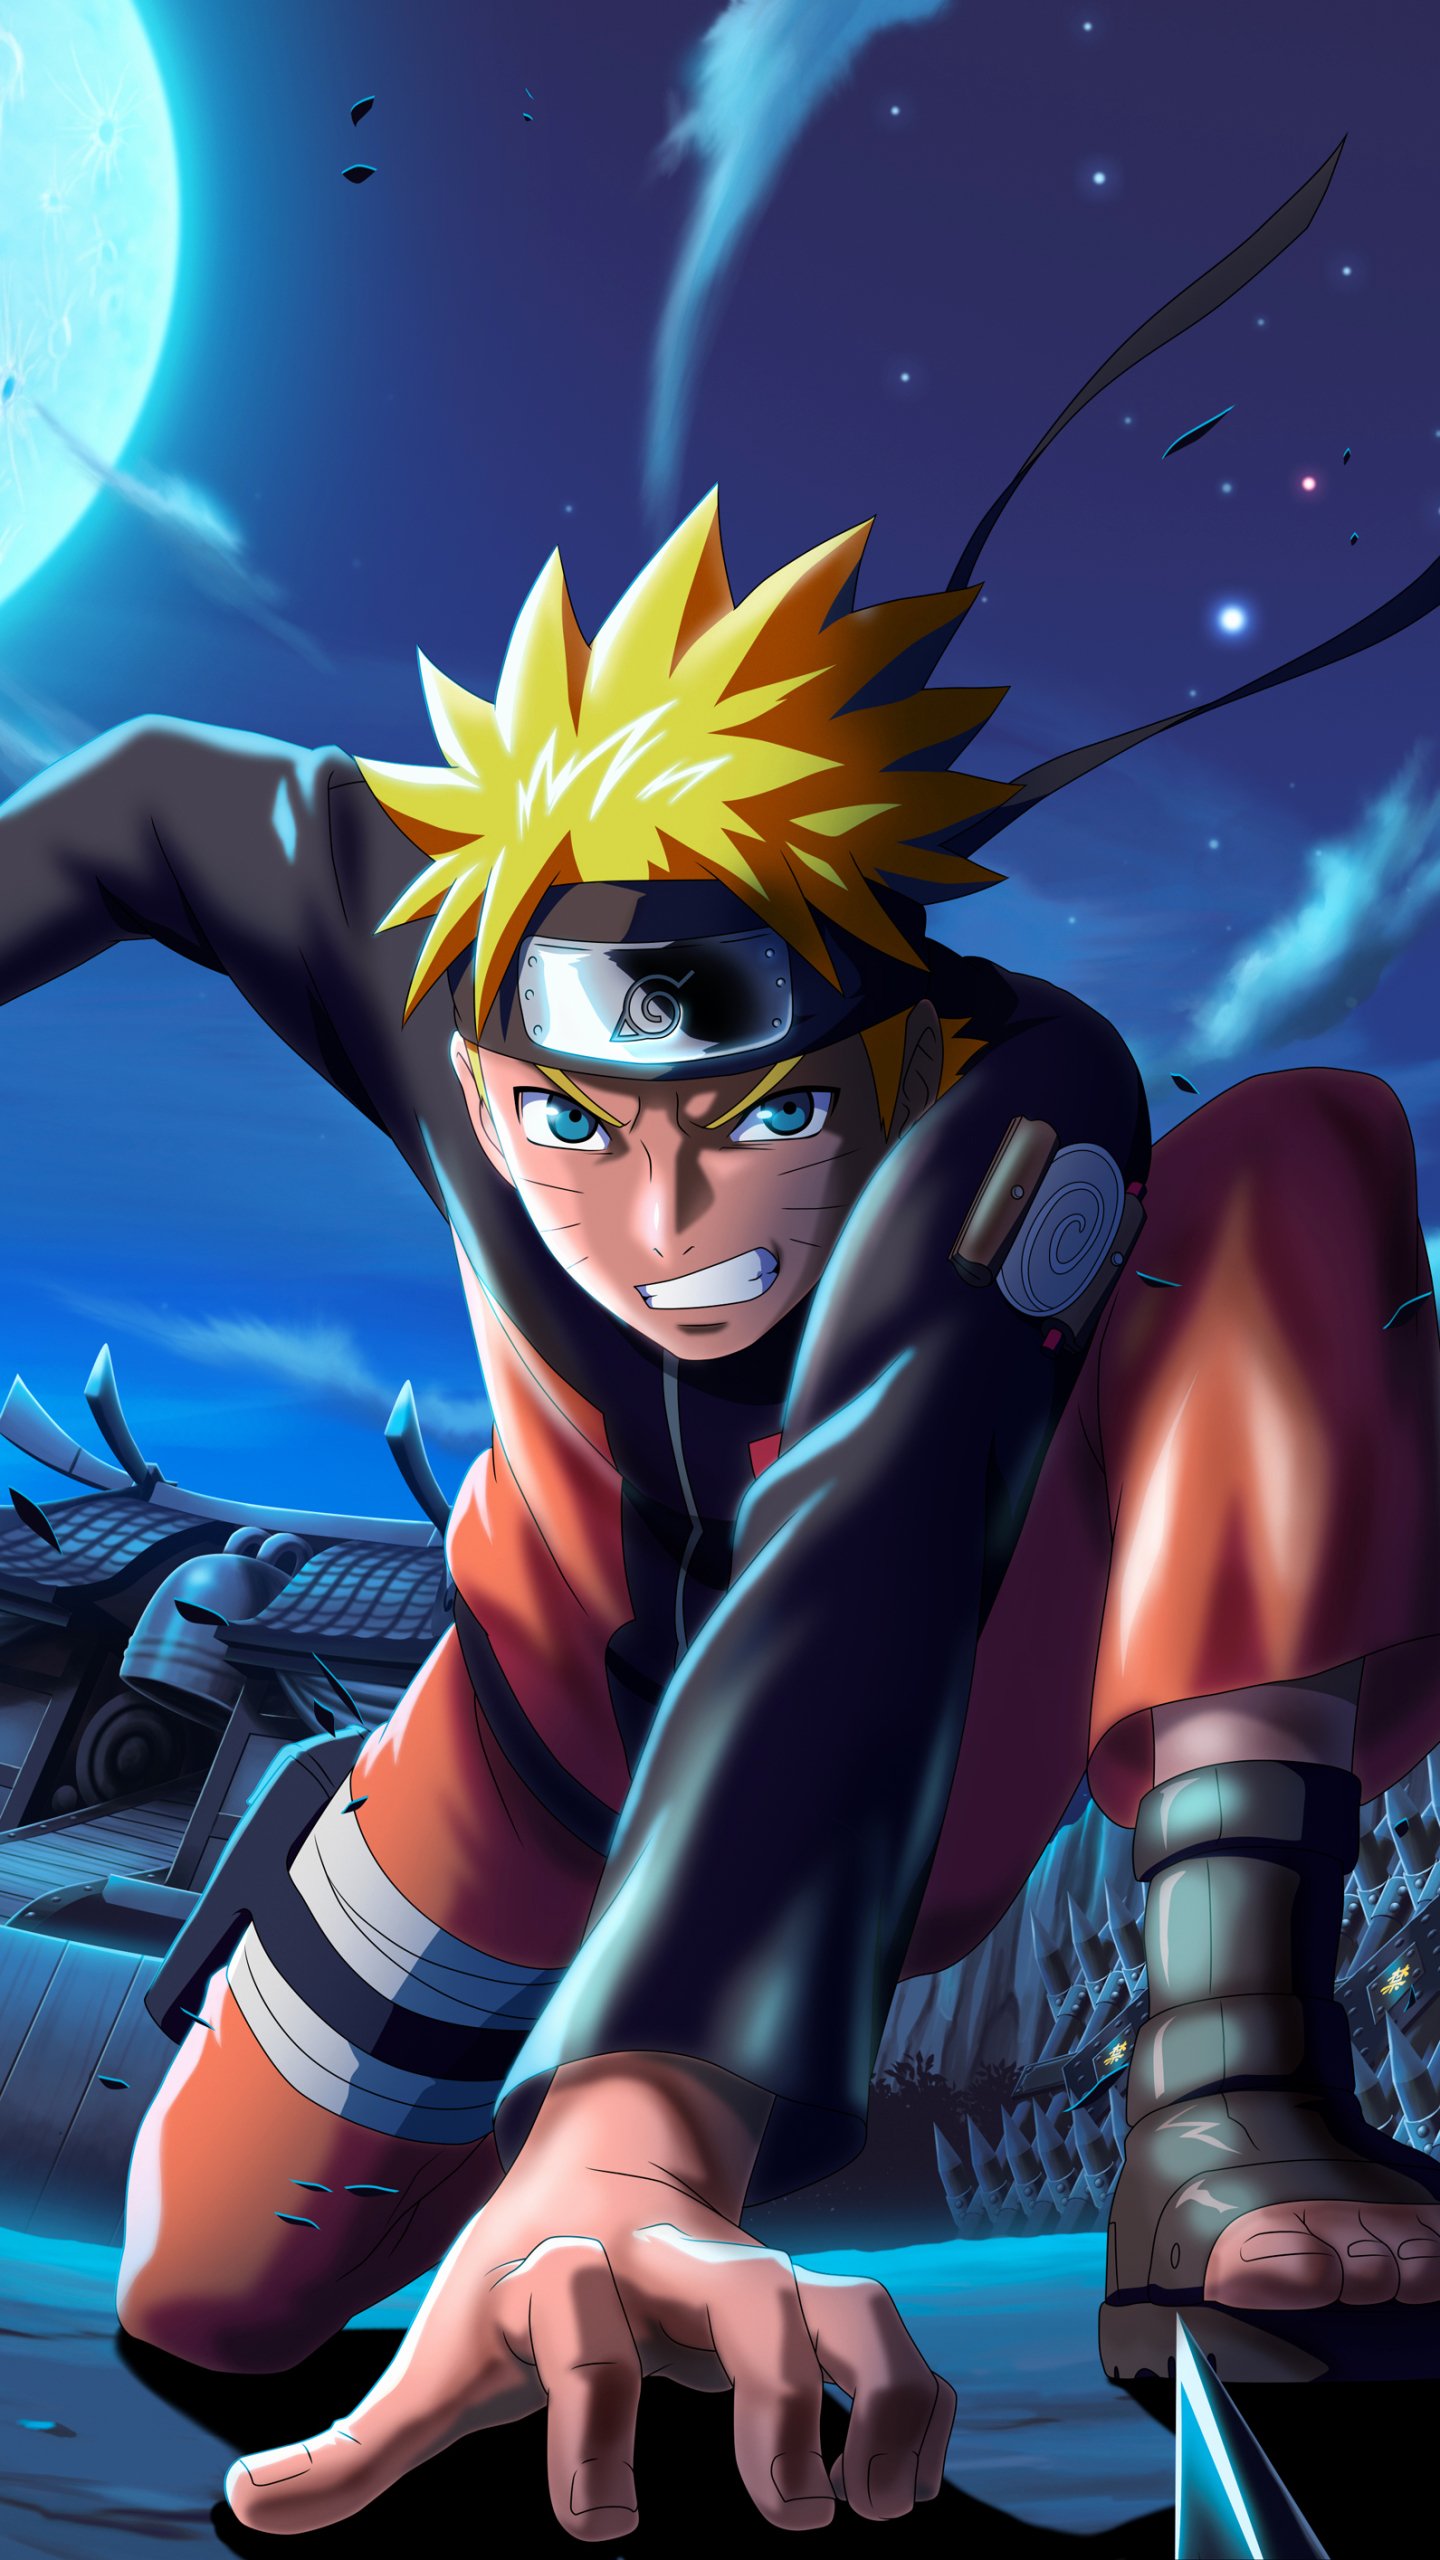 Free download Anime Naruto 4k Ultra HD Wallpaper by CMK [3840x2160] for  your Desktop, Mobile & Tablet | Explore 26+ Anime HD Naruto Wallpapers | Naruto  Hd Wallpapers, Hd Naruto Wallpapers, Hd Anime Wallpapers